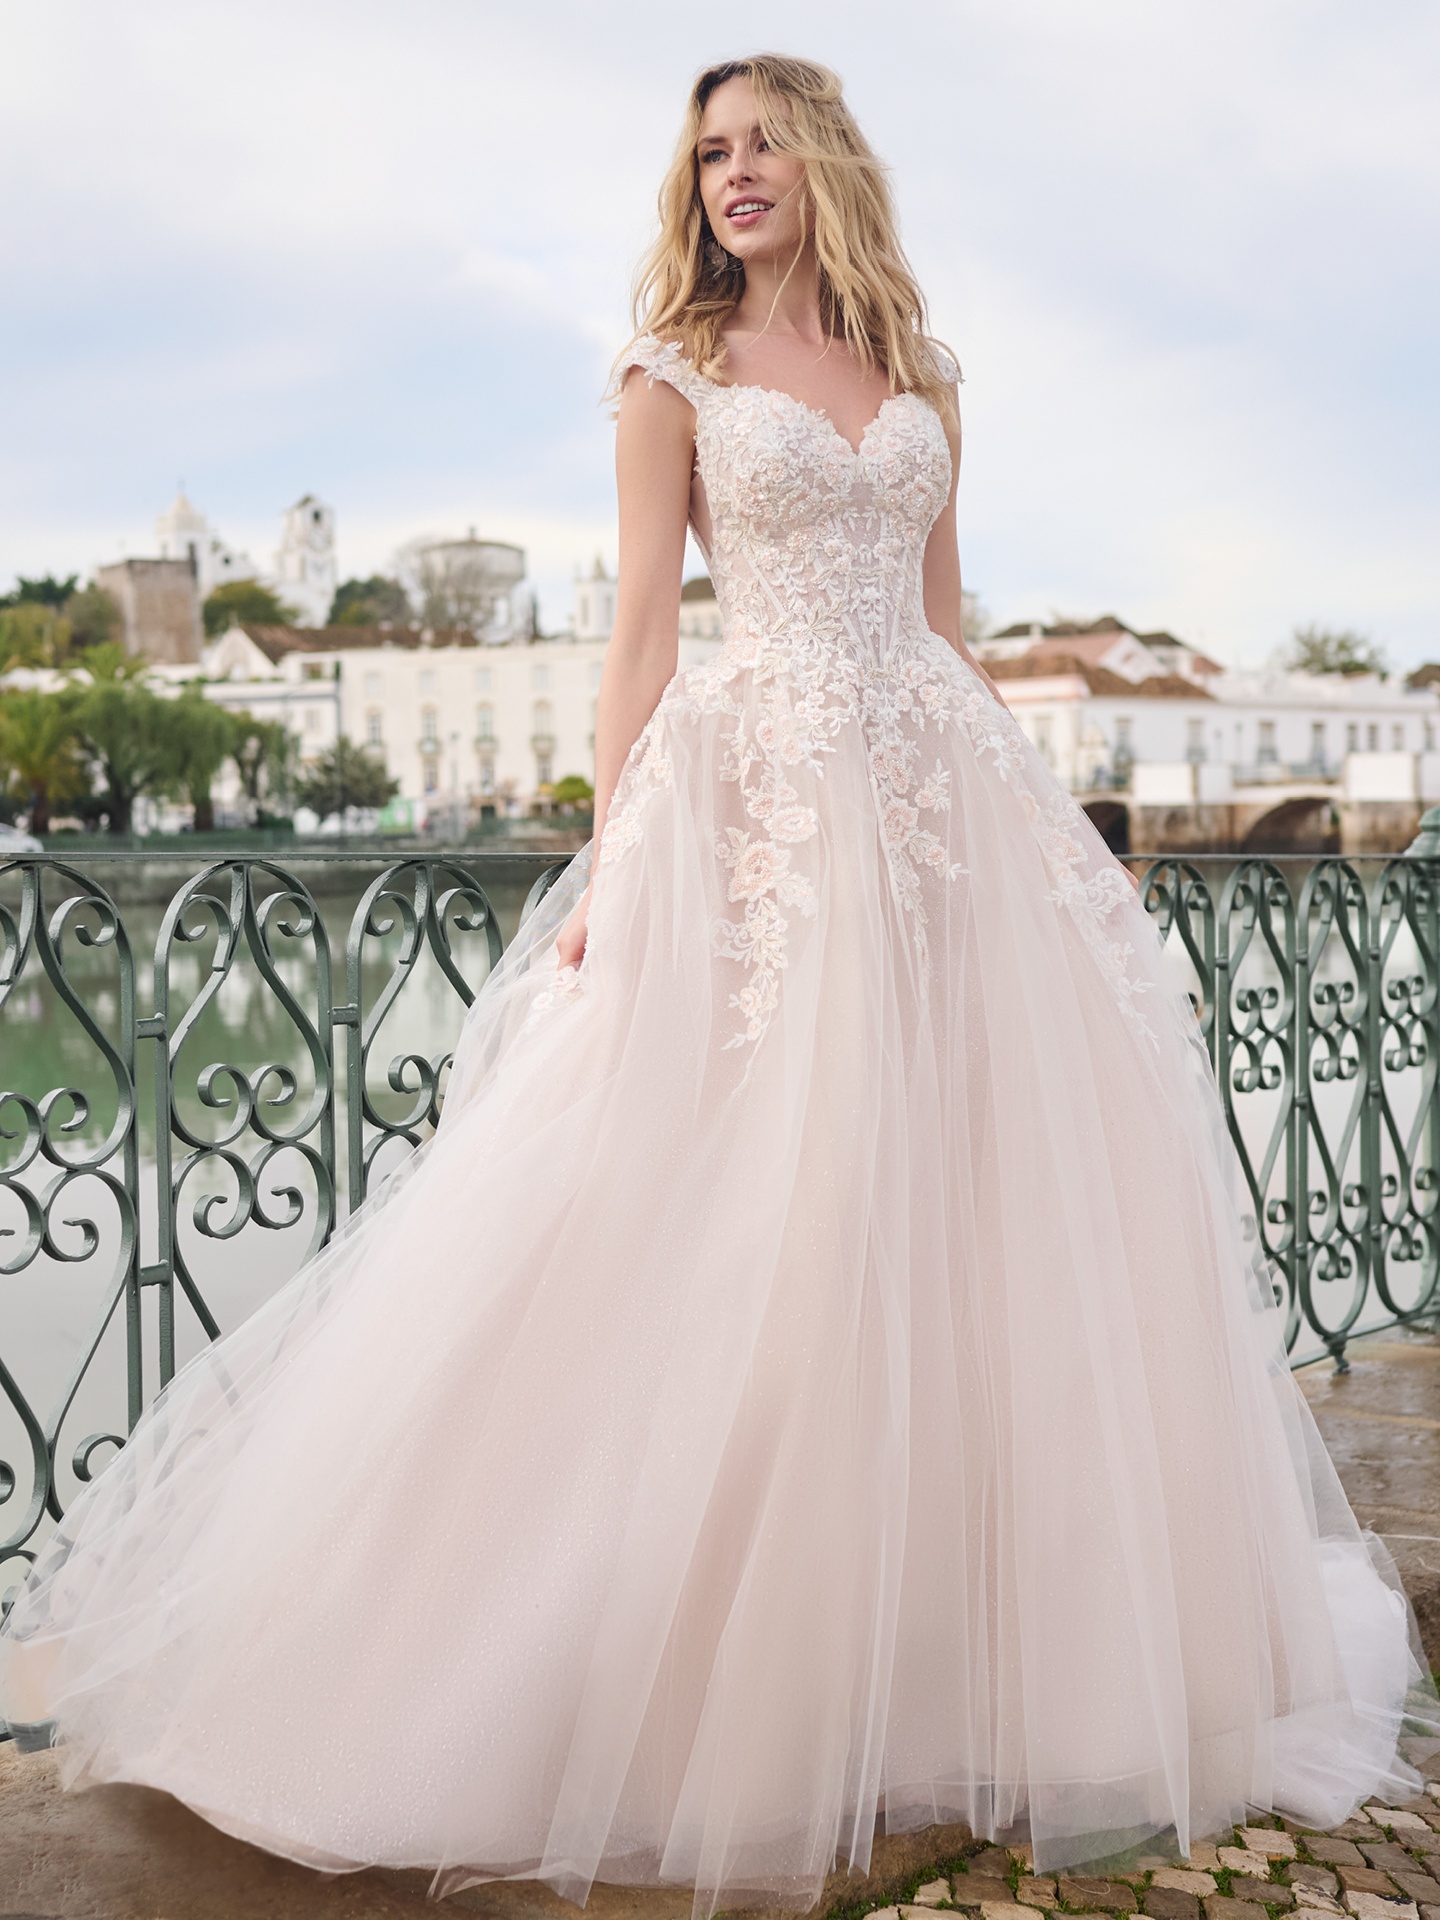 Off-Shoulder Lace Ball Gown Wedding Dress | Sophia Tolli